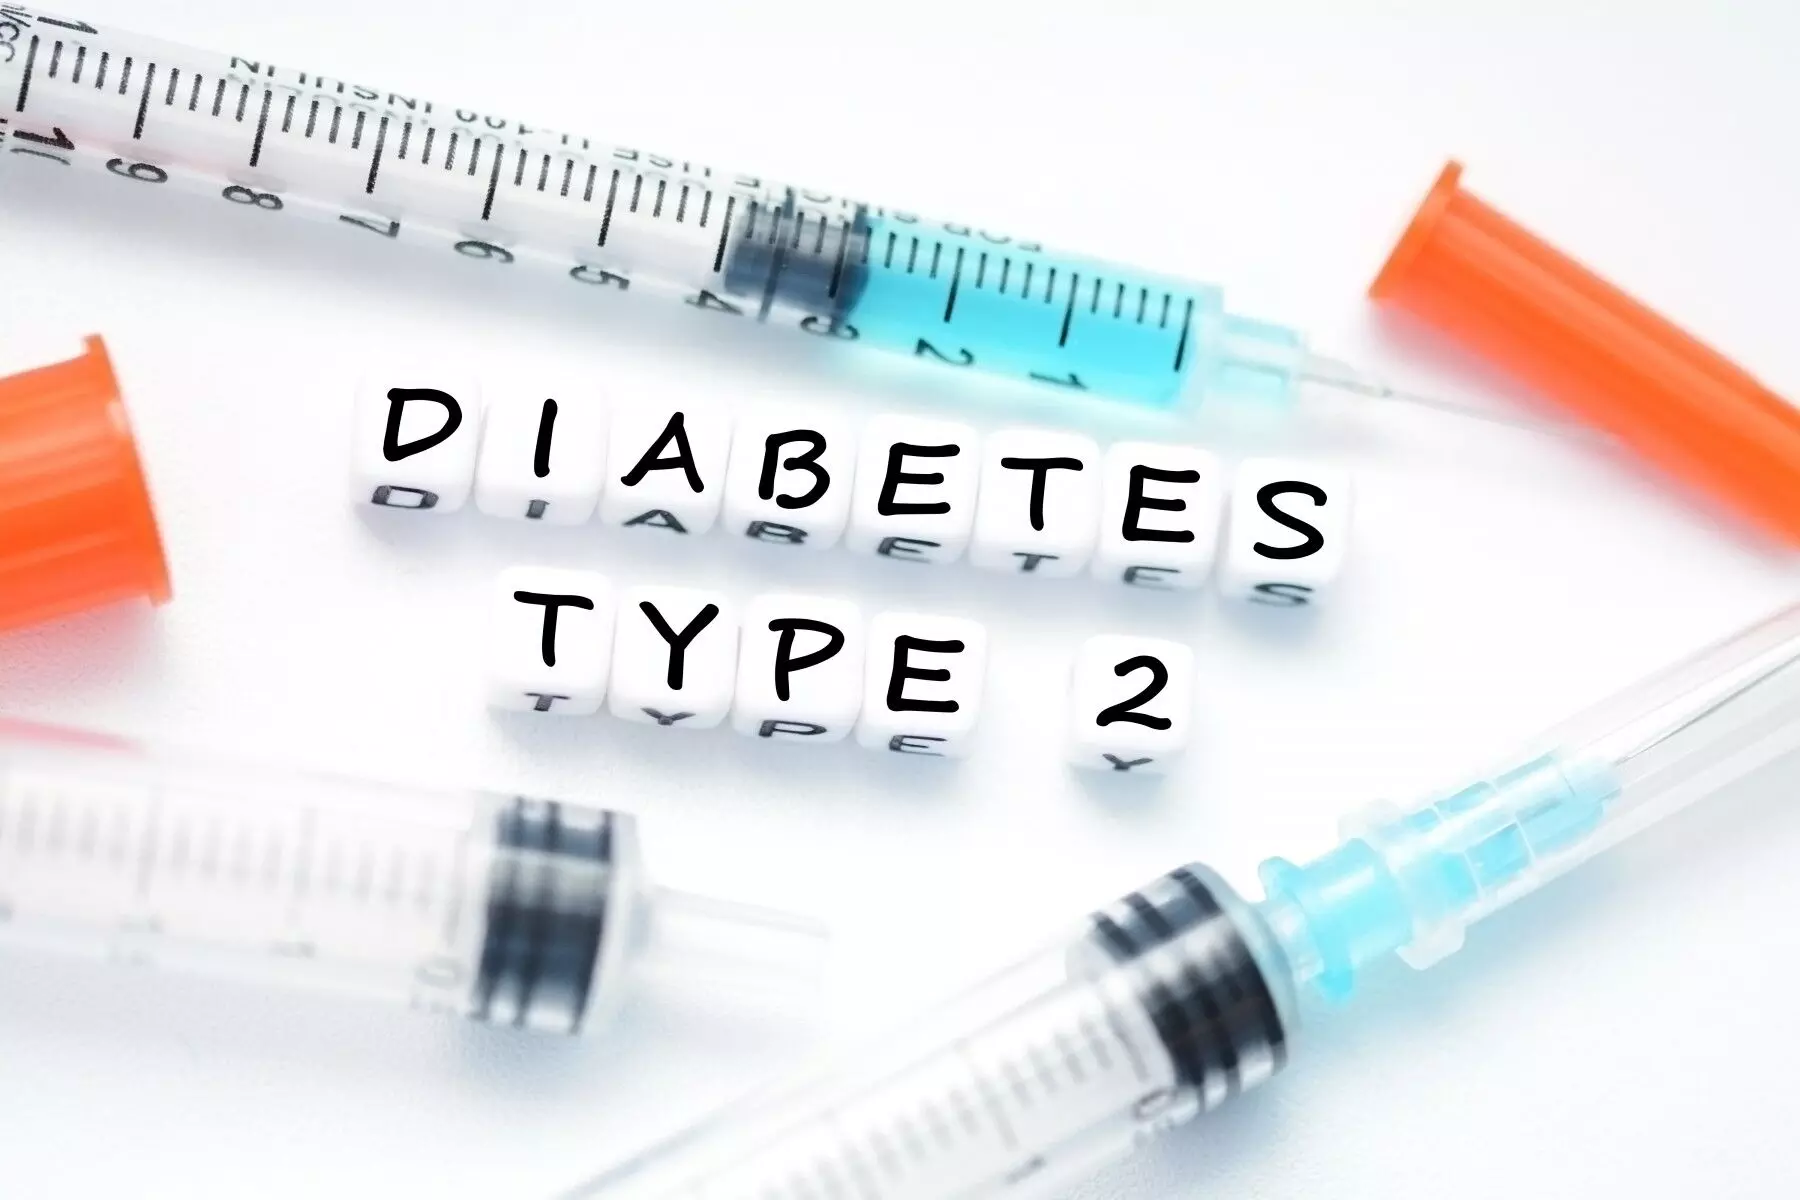 Diabetic peripheral neuropathy associated with cognitive decline in type 2 diabetes patients: Study